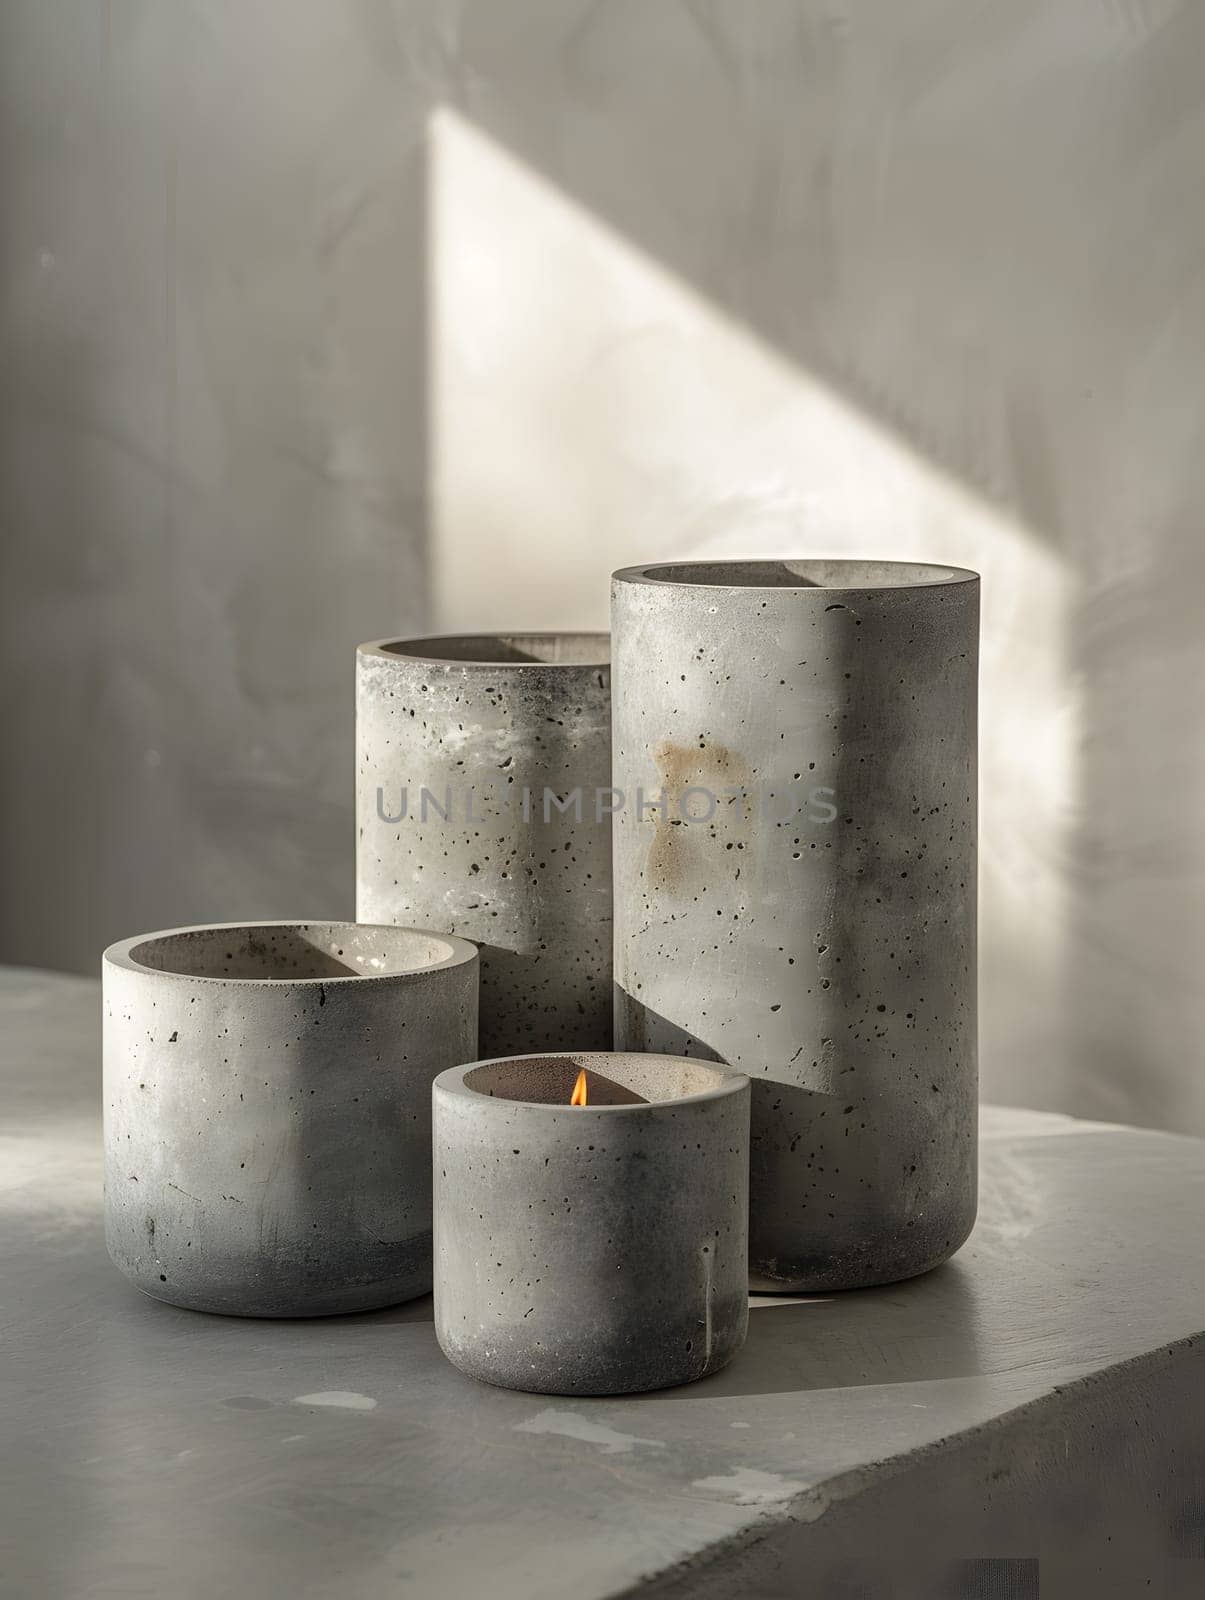 A collection of wooden rectangle and cylinder candle holders, resembling automotive tires, placed on a table. The artful display combines glass, wood, and gas elements